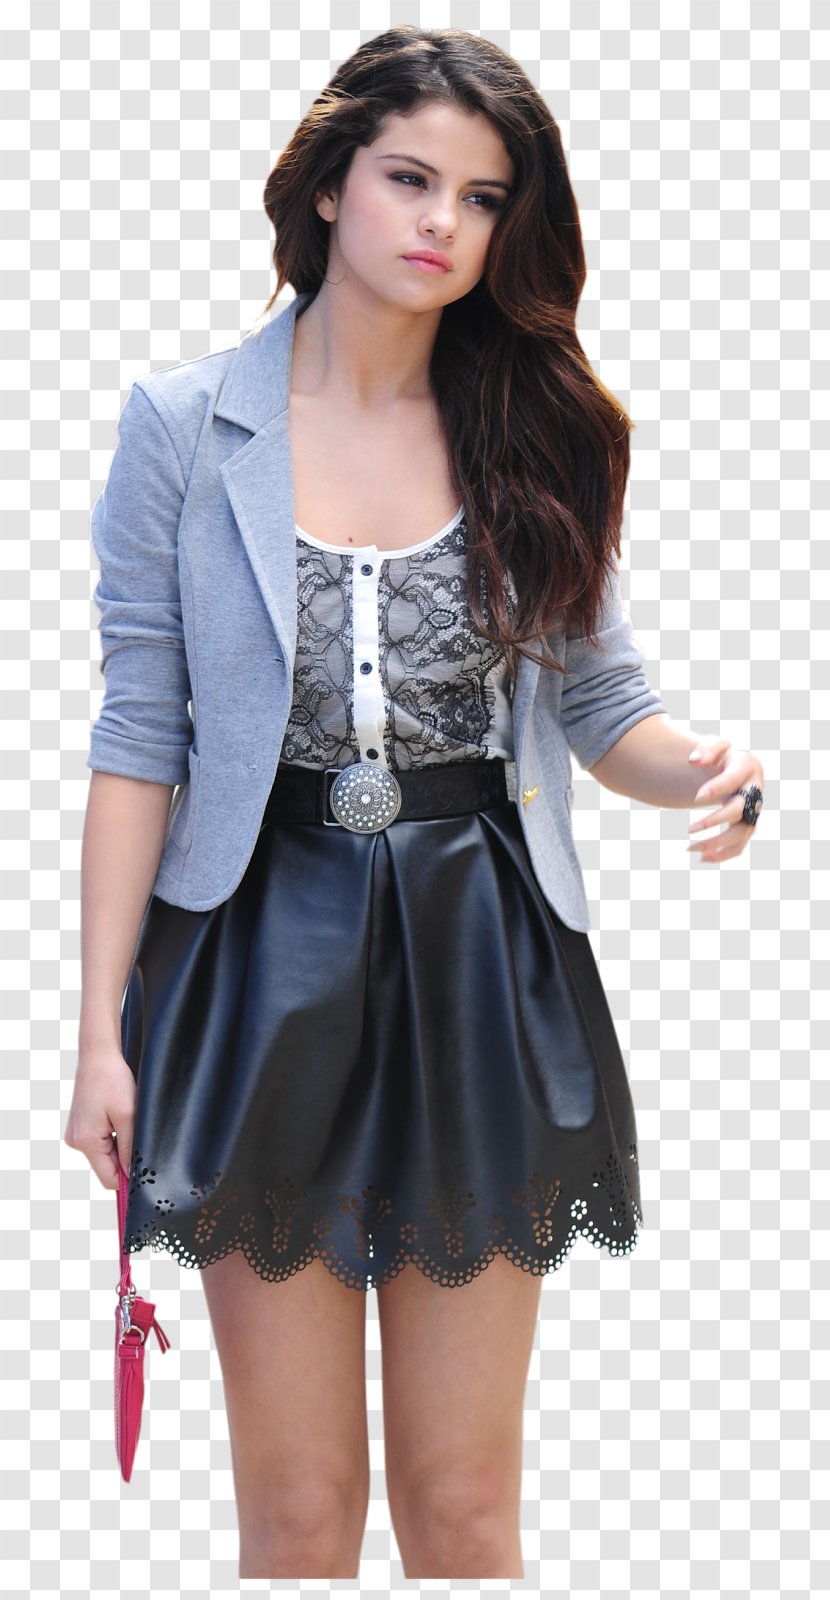 Dream Out Loud By Selena Gomez Black And White - Heart - Rita Ora Transparent PNG